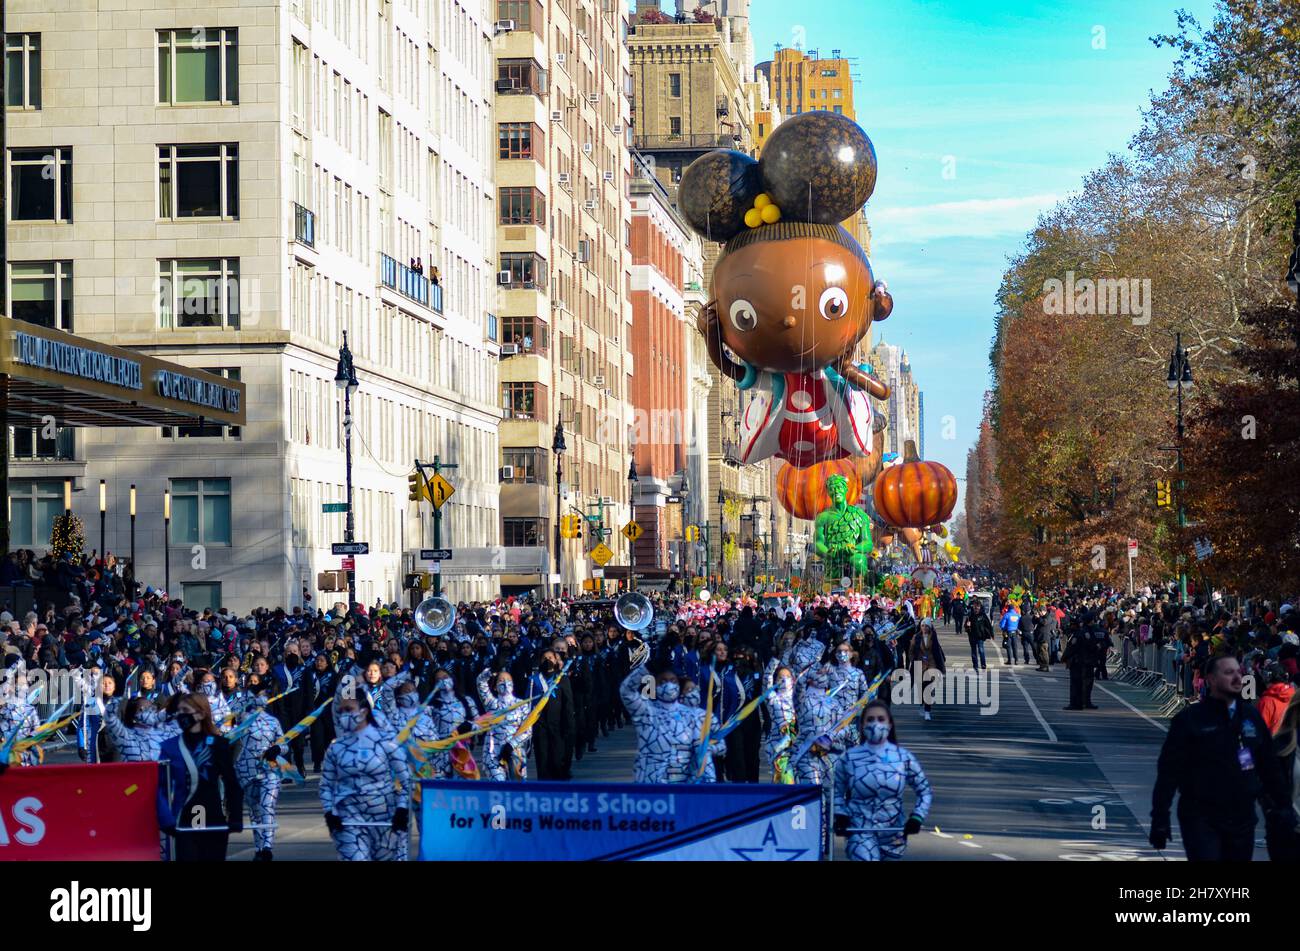 New York, United States. 25th Nov, 2021. Balloons of different characters seen floating over Sixth Avenue during the 95th annual Macy's Thanksgiving Day Parade in New York City on November 25, 2021. (Photo by Ryan Rahman/Pacific Press) Credit: Pacific Press Media Production Corp./Alamy Live News Stock Photo